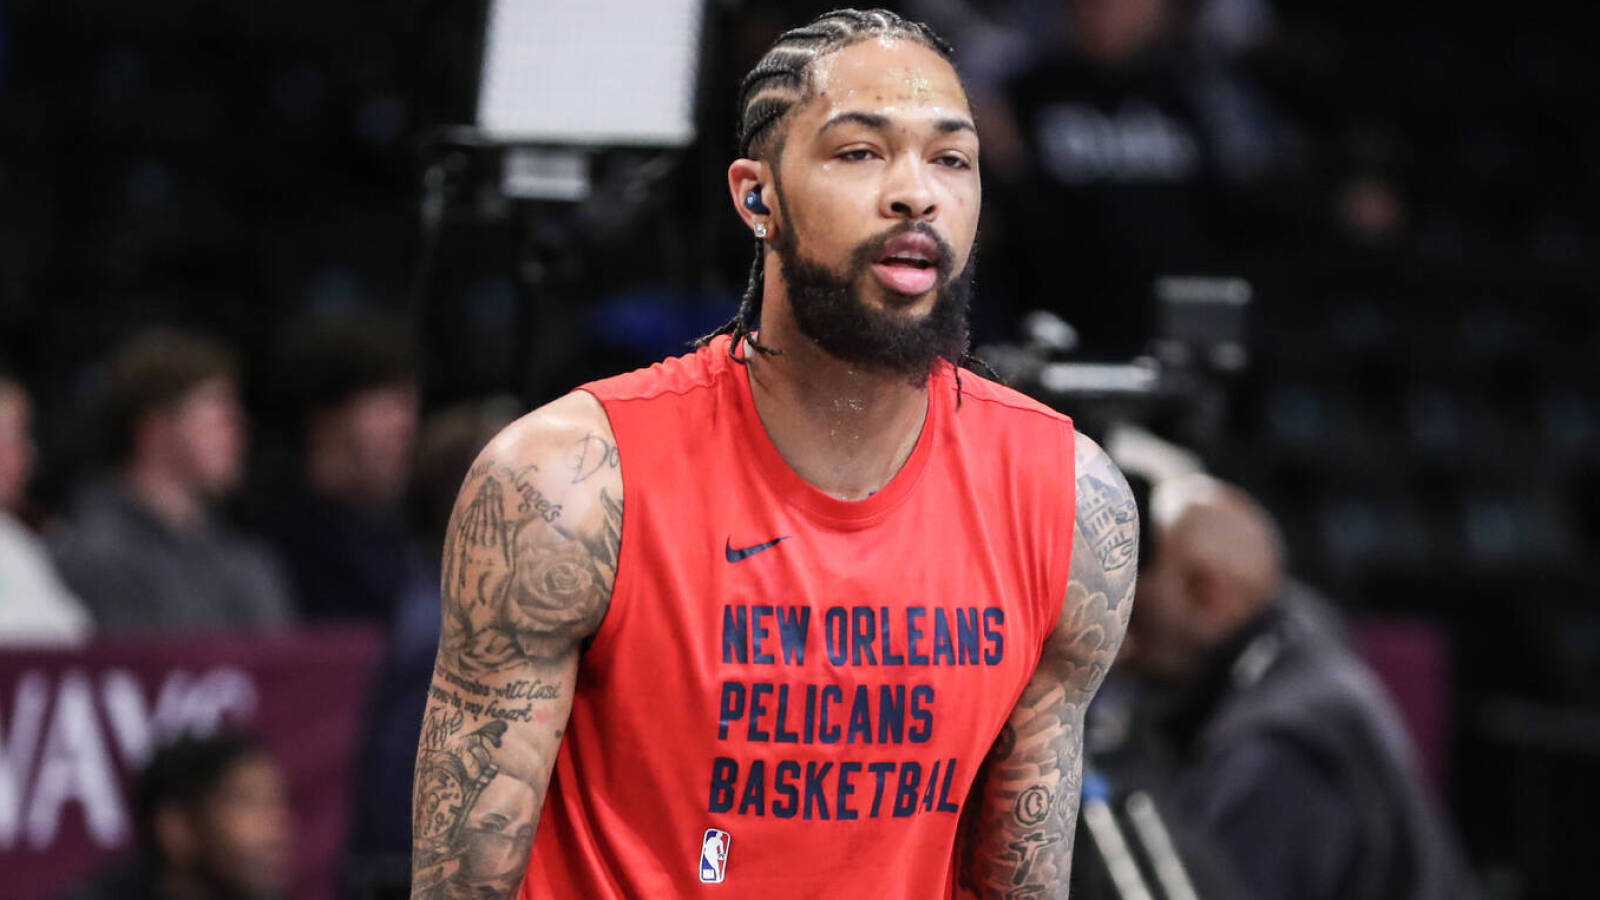 After benching, Pelicans will have to lean on Brandon Ingram versus Kings